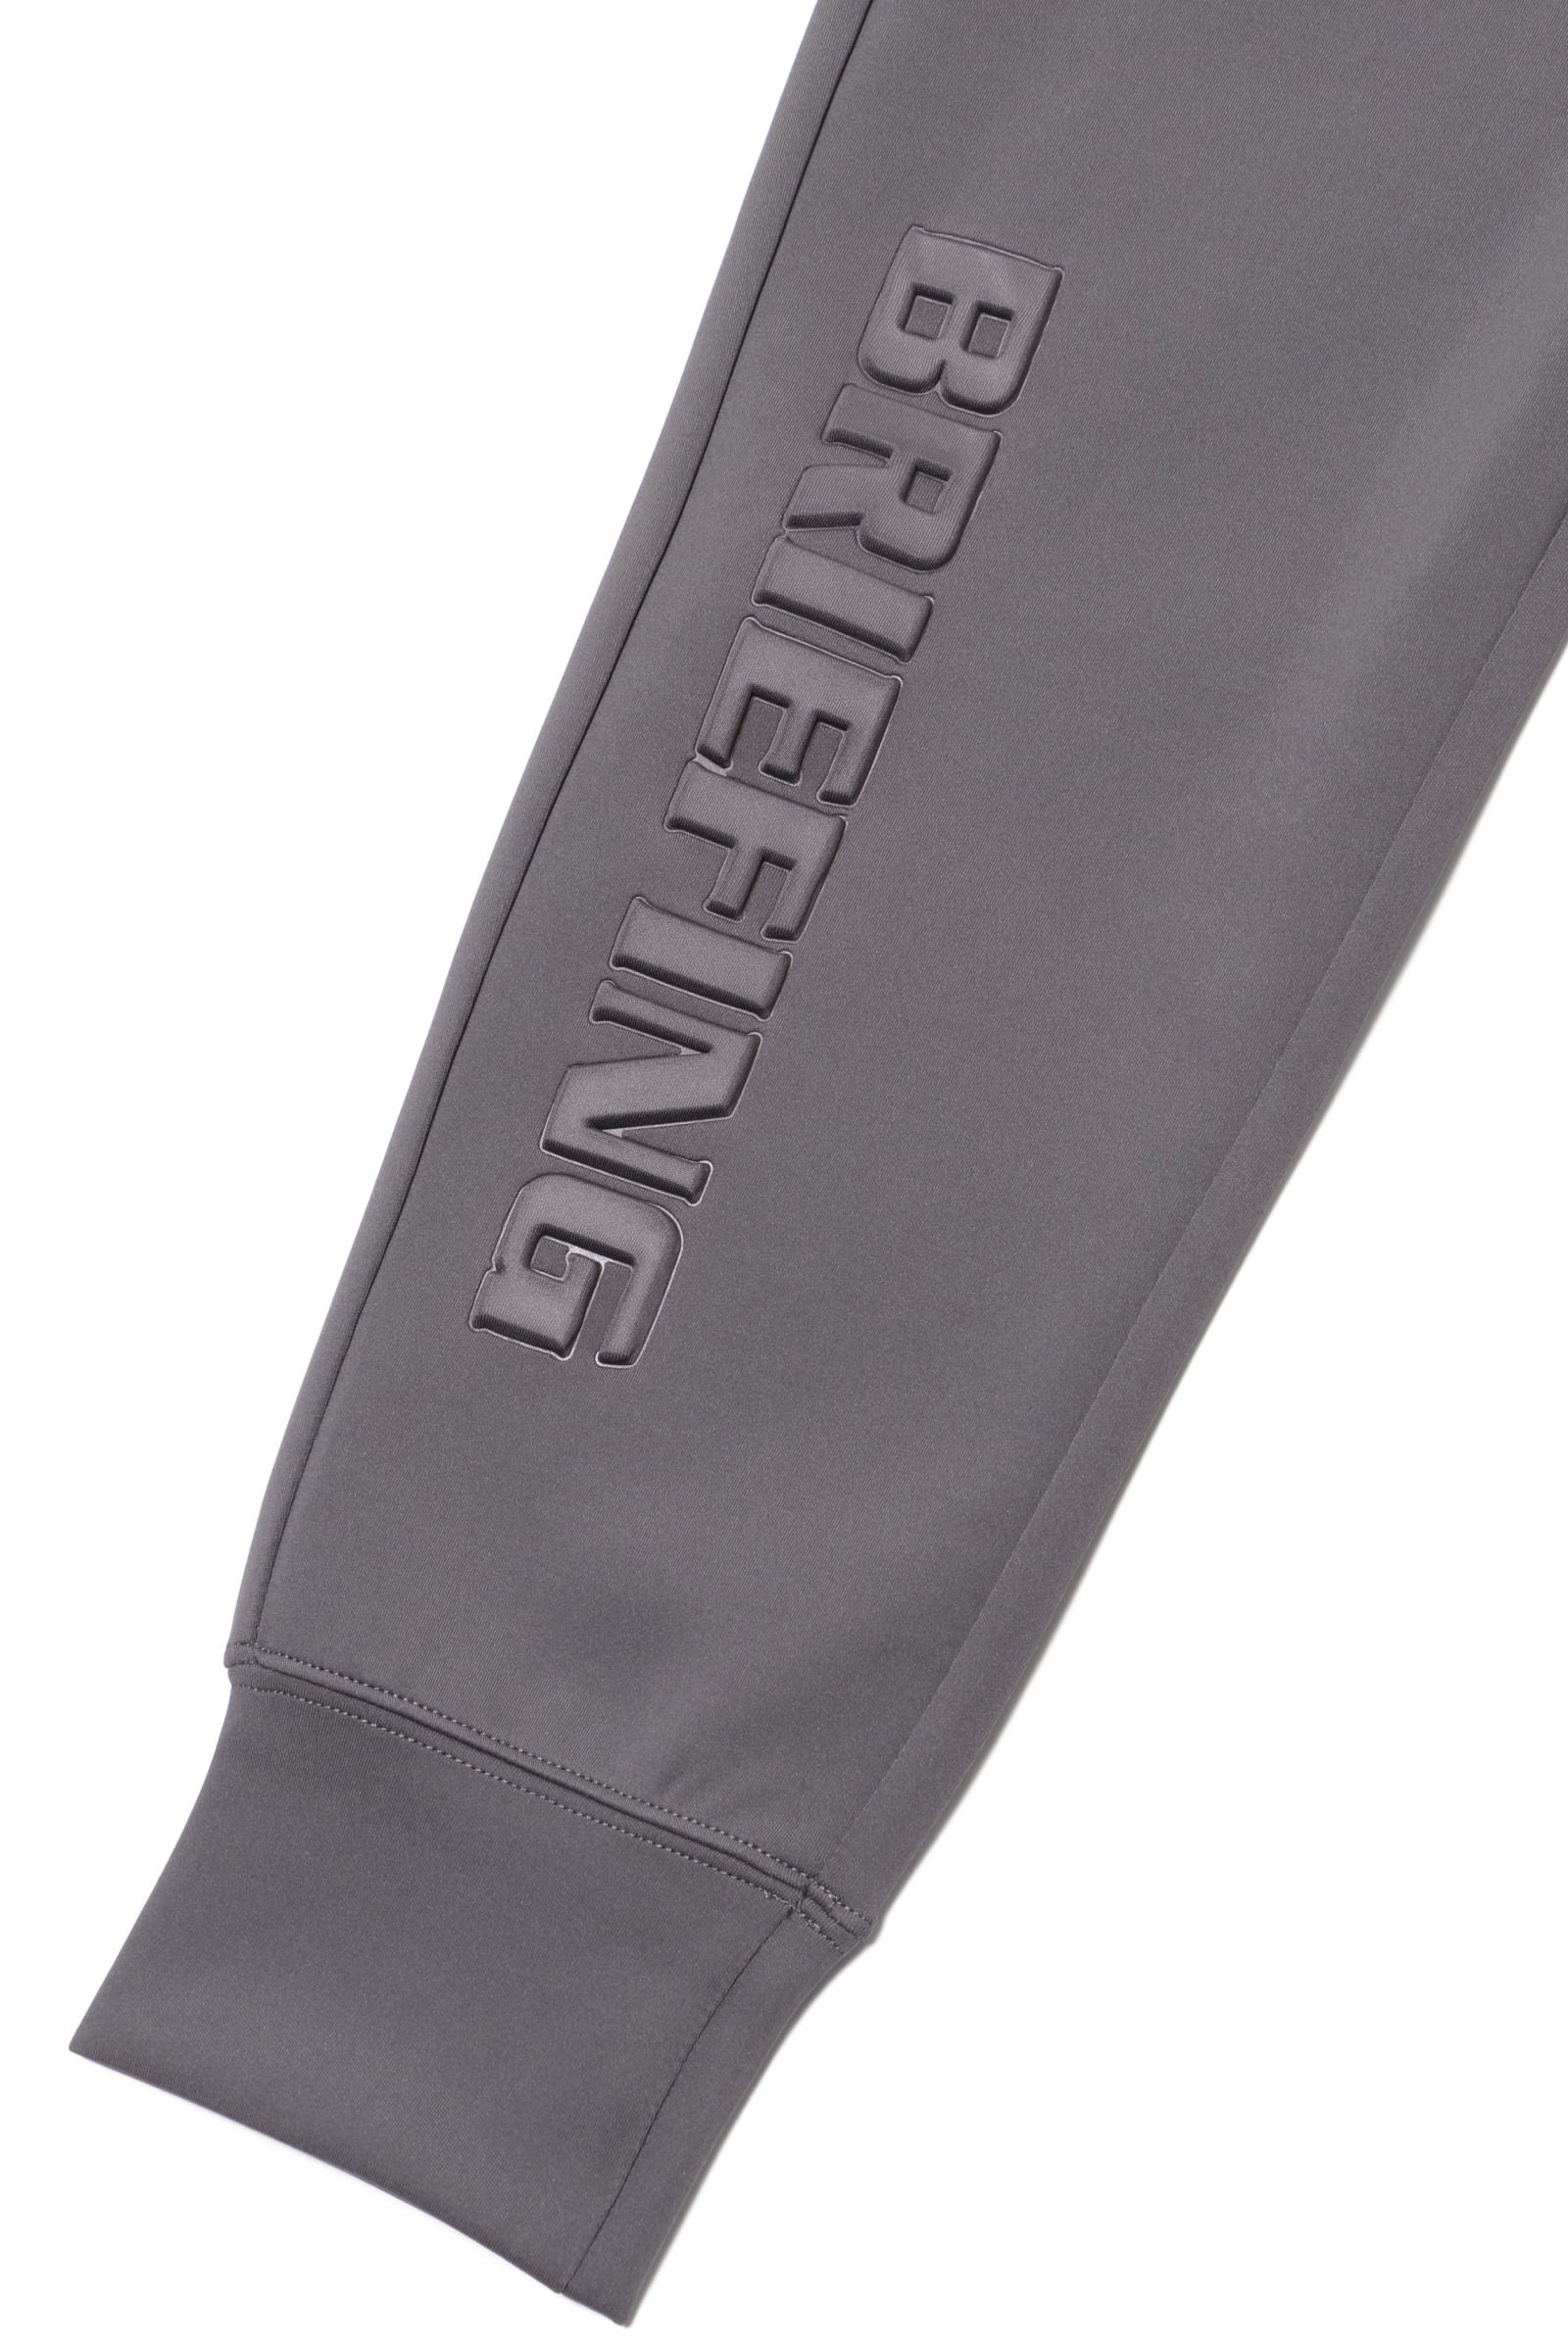 BRIEFING GOLF - 【セットアップあり】 MENS 3D LOGO JOGGER PANTS 